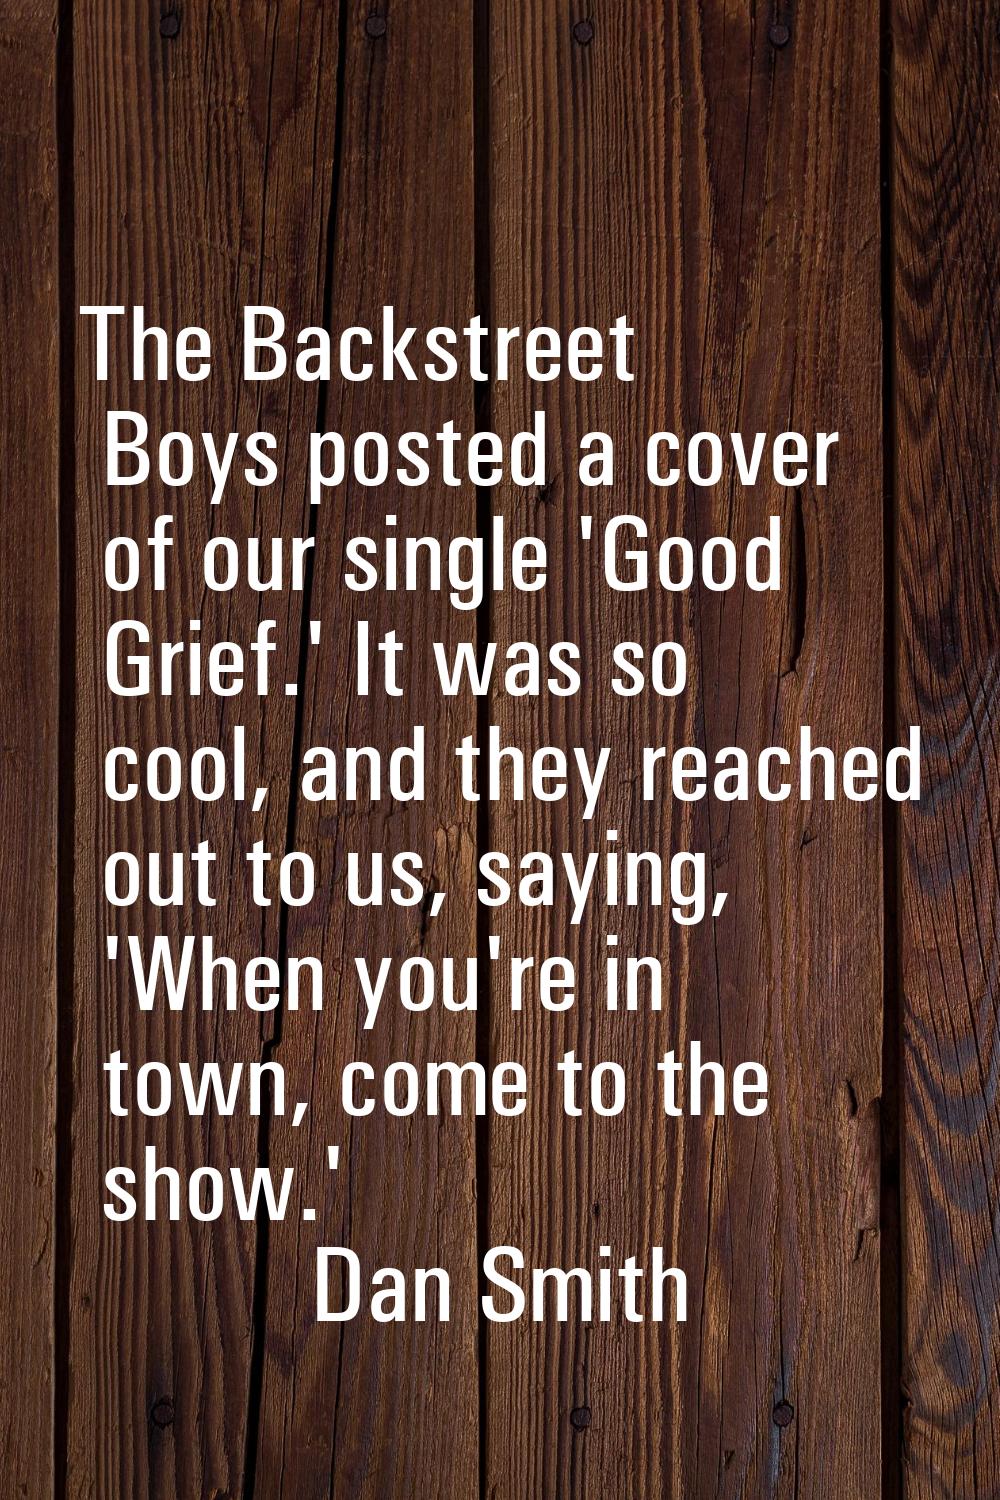 The Backstreet Boys posted a cover of our single 'Good Grief.' It was so cool, and they reached out